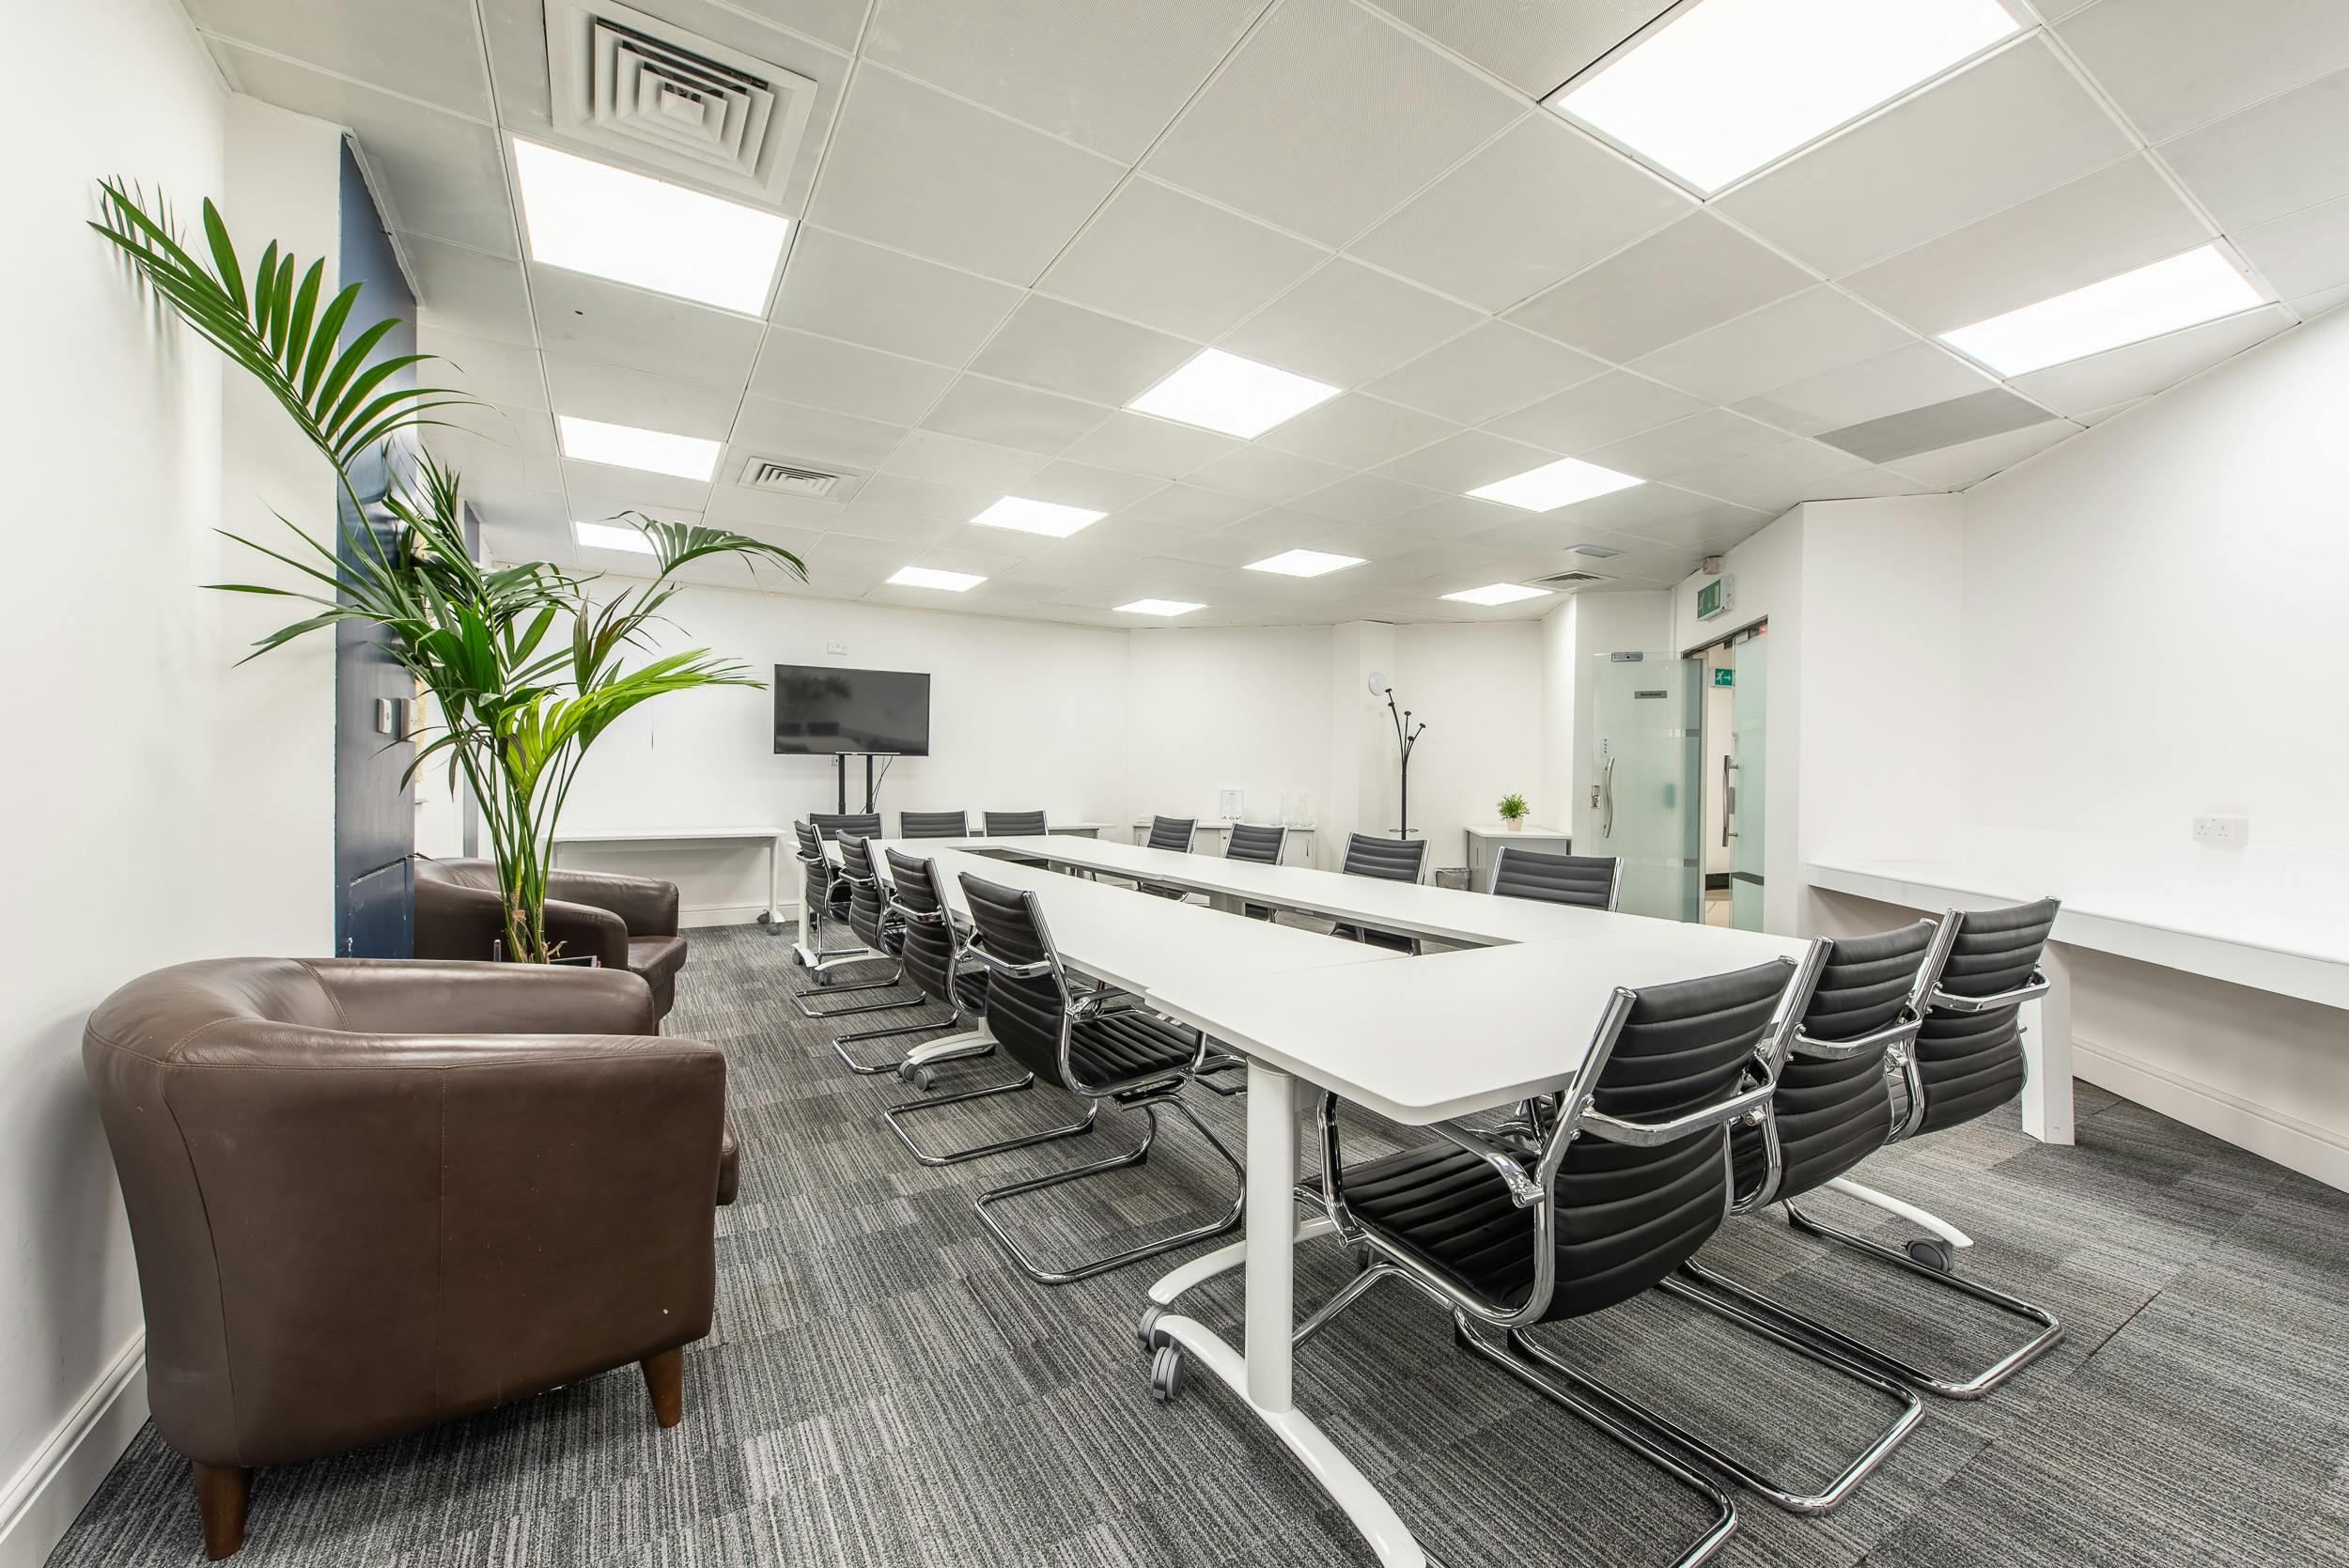 Cannon Street – 8 Person Office – Dowgate Hill